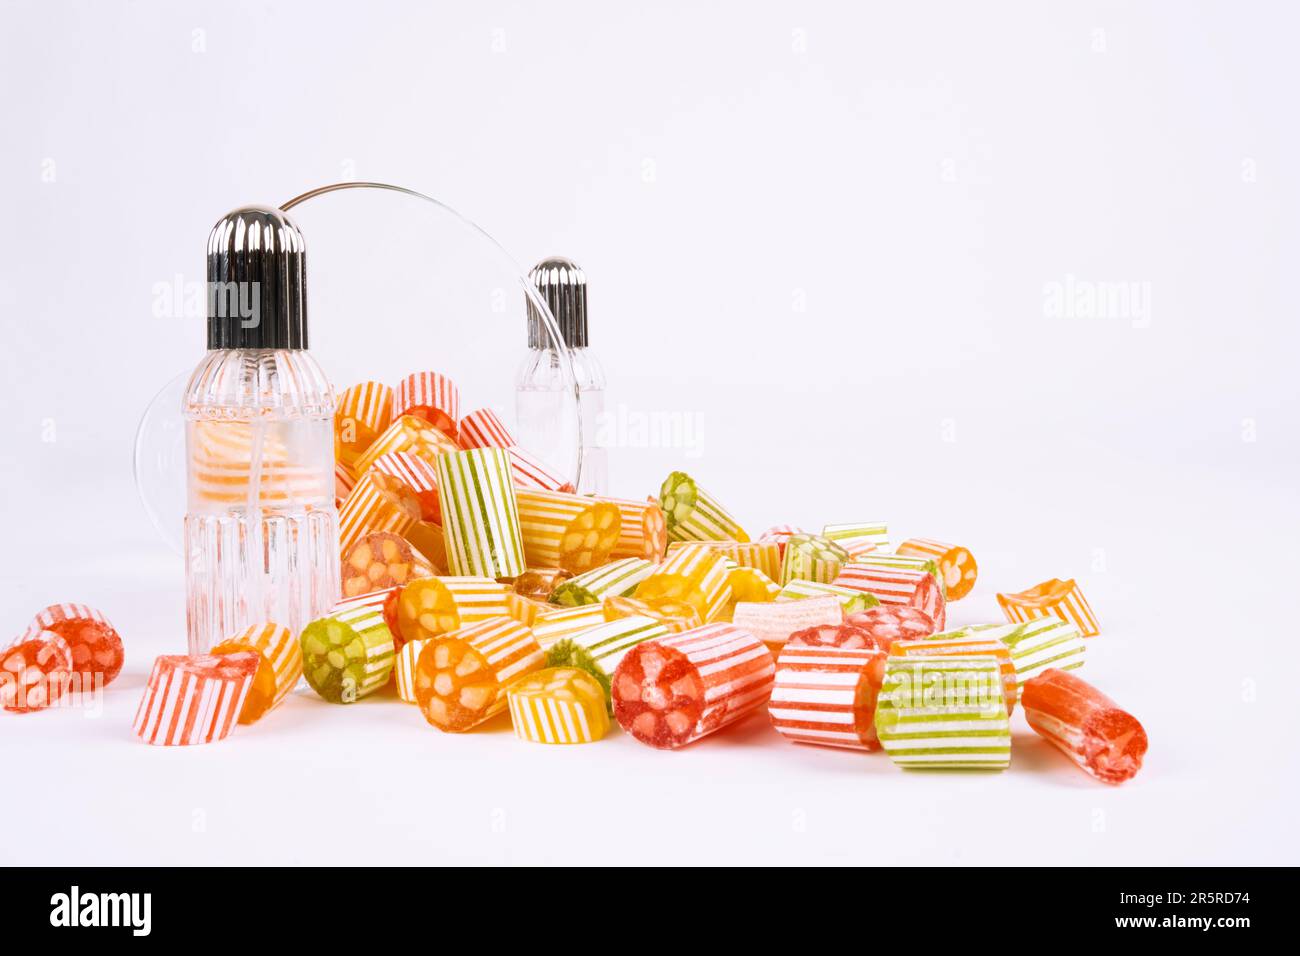 Spilled group of colorful sweets and cologne. Bowl of candies, many treats. Isolated white background, copy space.  Ramadan feast concept image. Stock Photo